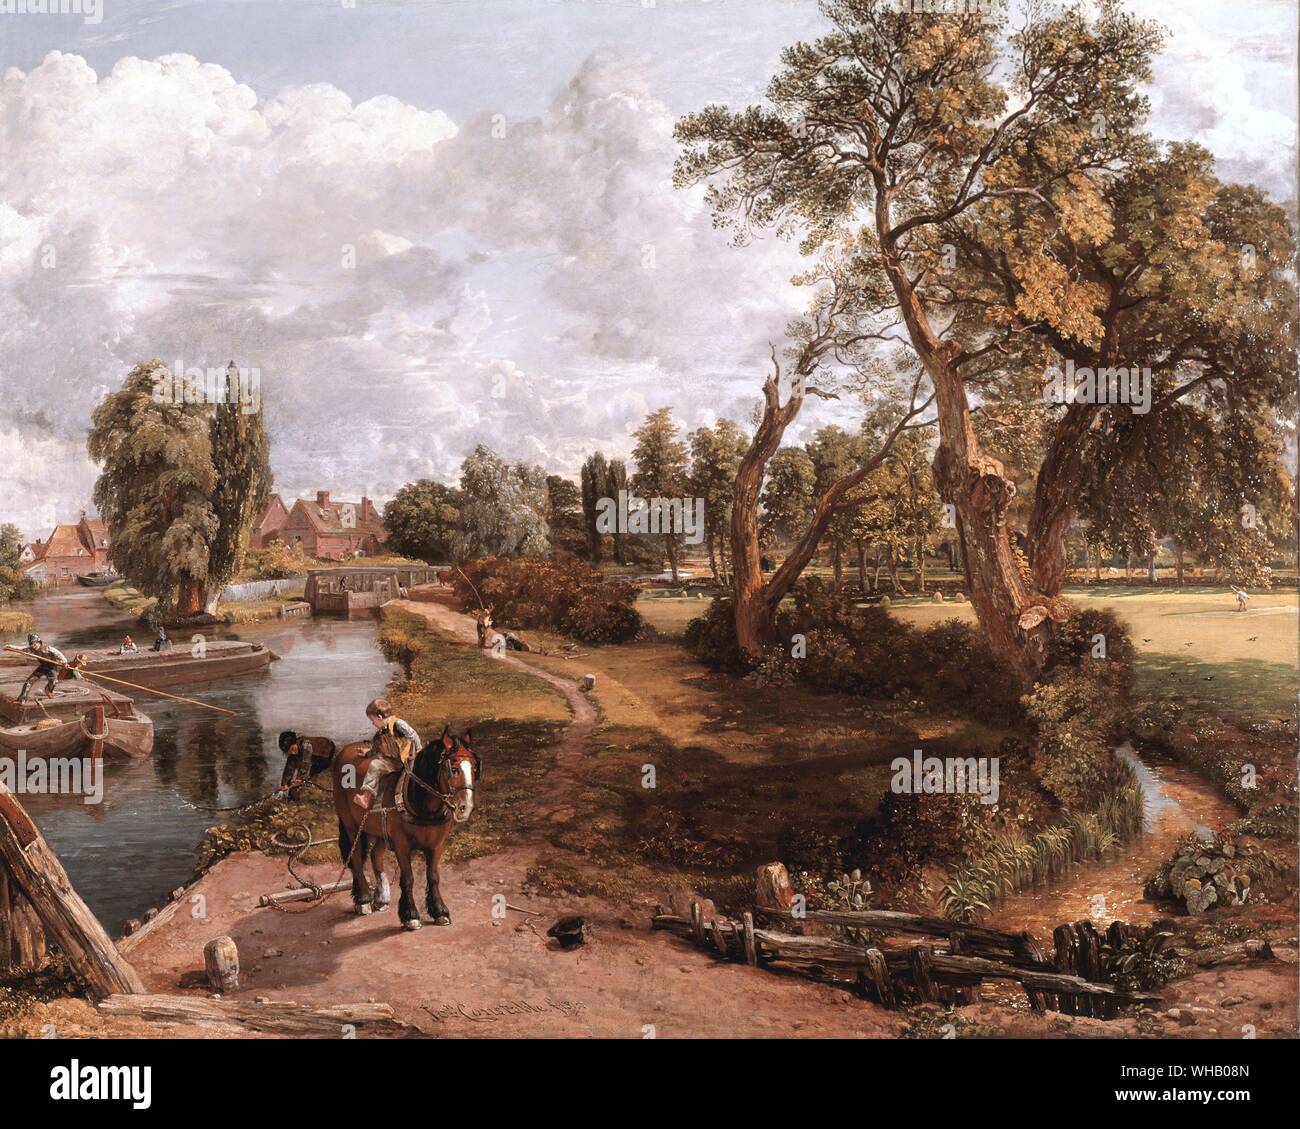 Flatford Mill by Constable . 'Scene on a Navigable River' (1816-17). John Constable (June 11, 1776 - March 31, 1837) was a British Romantic artist.. Flatford Mill is on the River Stour close to the Suffolk-Essex border. The Centre buildings, particularly the Mill and Willy Lott's House, are instantly recognisable since they feature in many paintings by John Constable.. Stock Photo